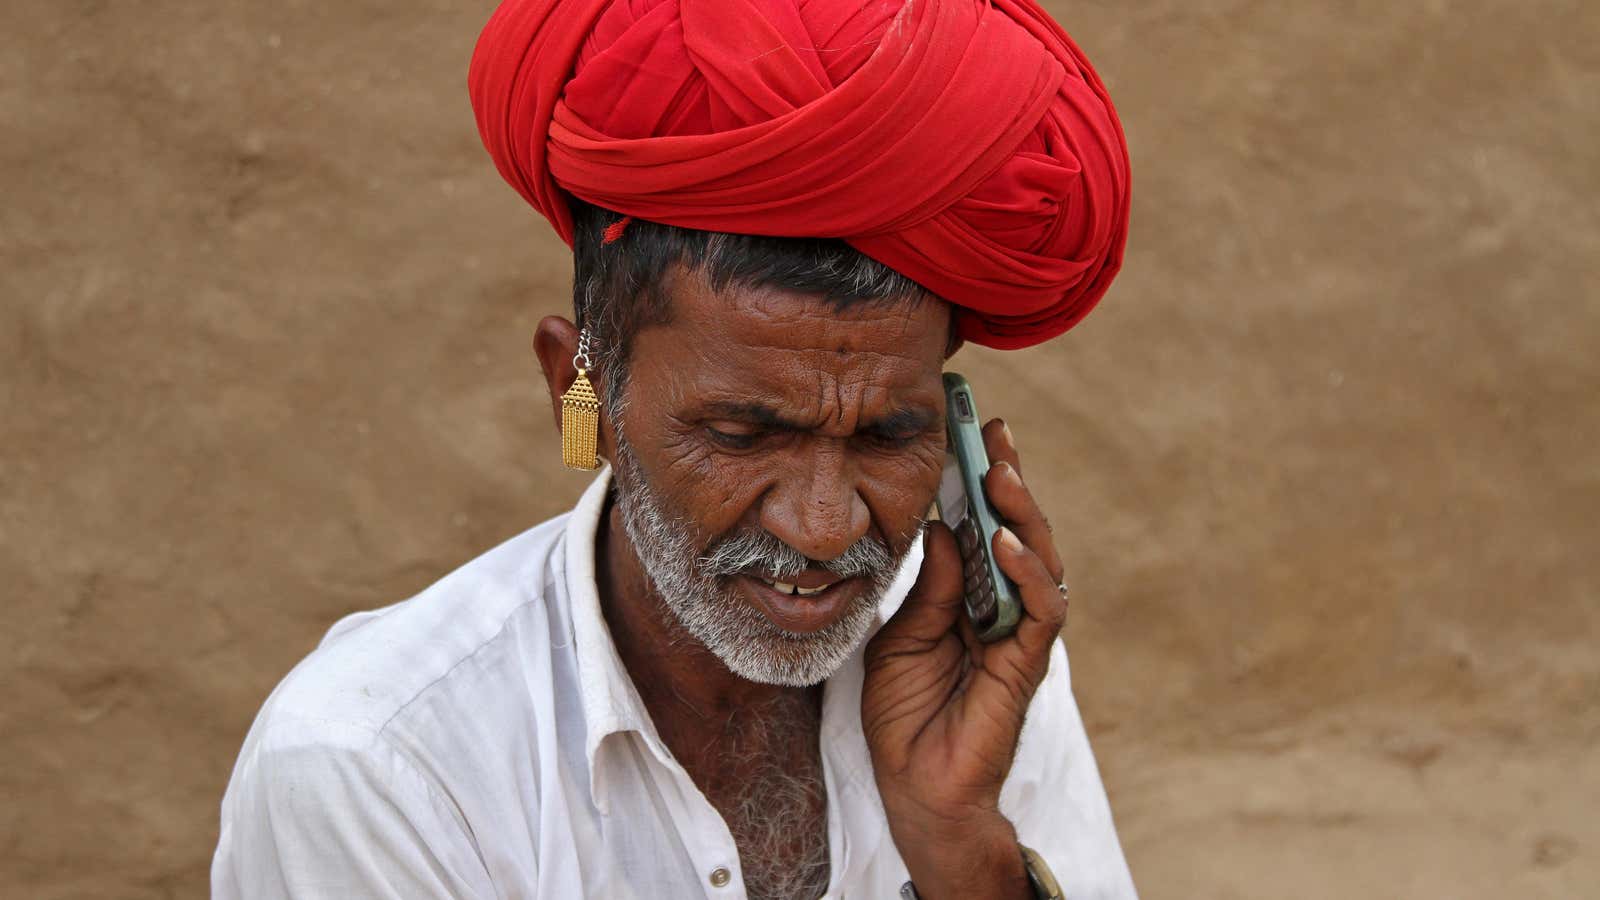 A man talks on his mobile phone in the village of Devmali in the desert state of Rajasthan, India June 14, 2016.